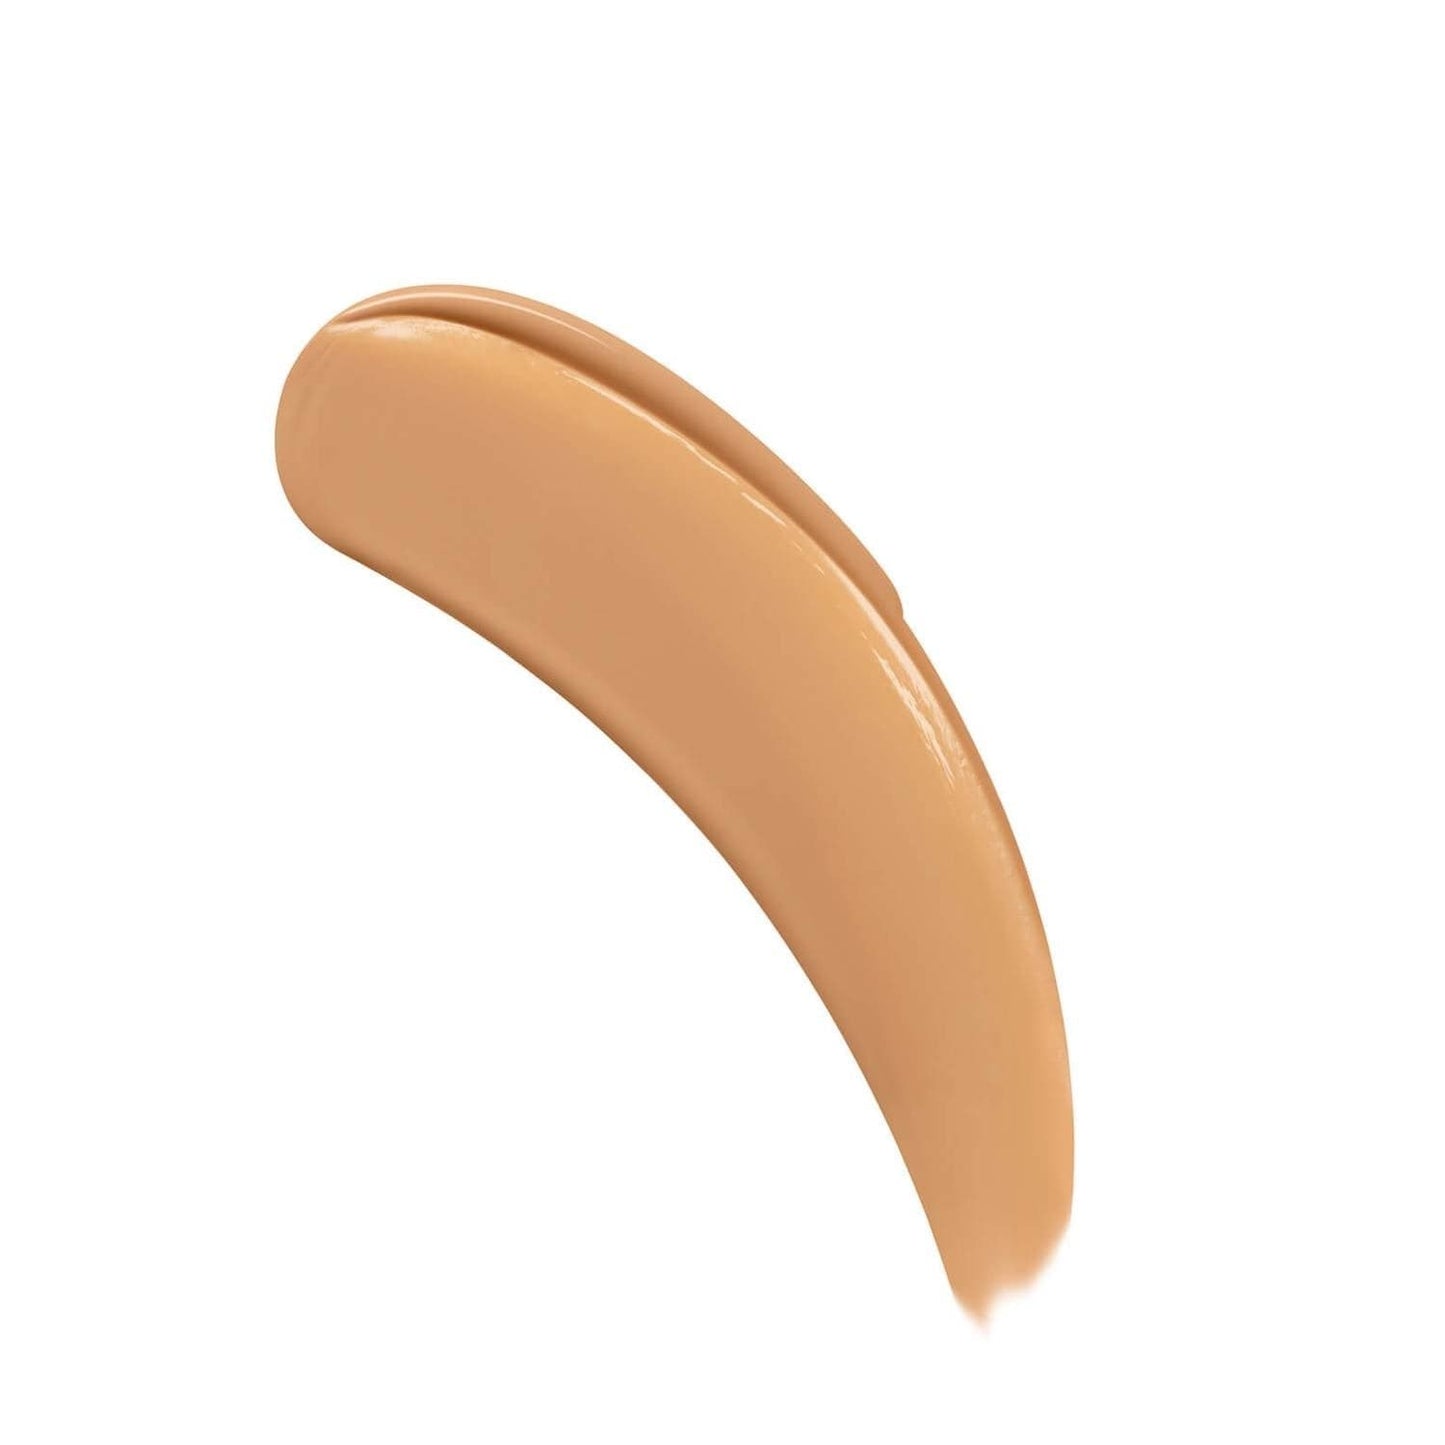 IT COSMETICS Beauty IT Cosmetics Your Skin But Better Foundation and Skincare 30ml - 41 Tan Warm